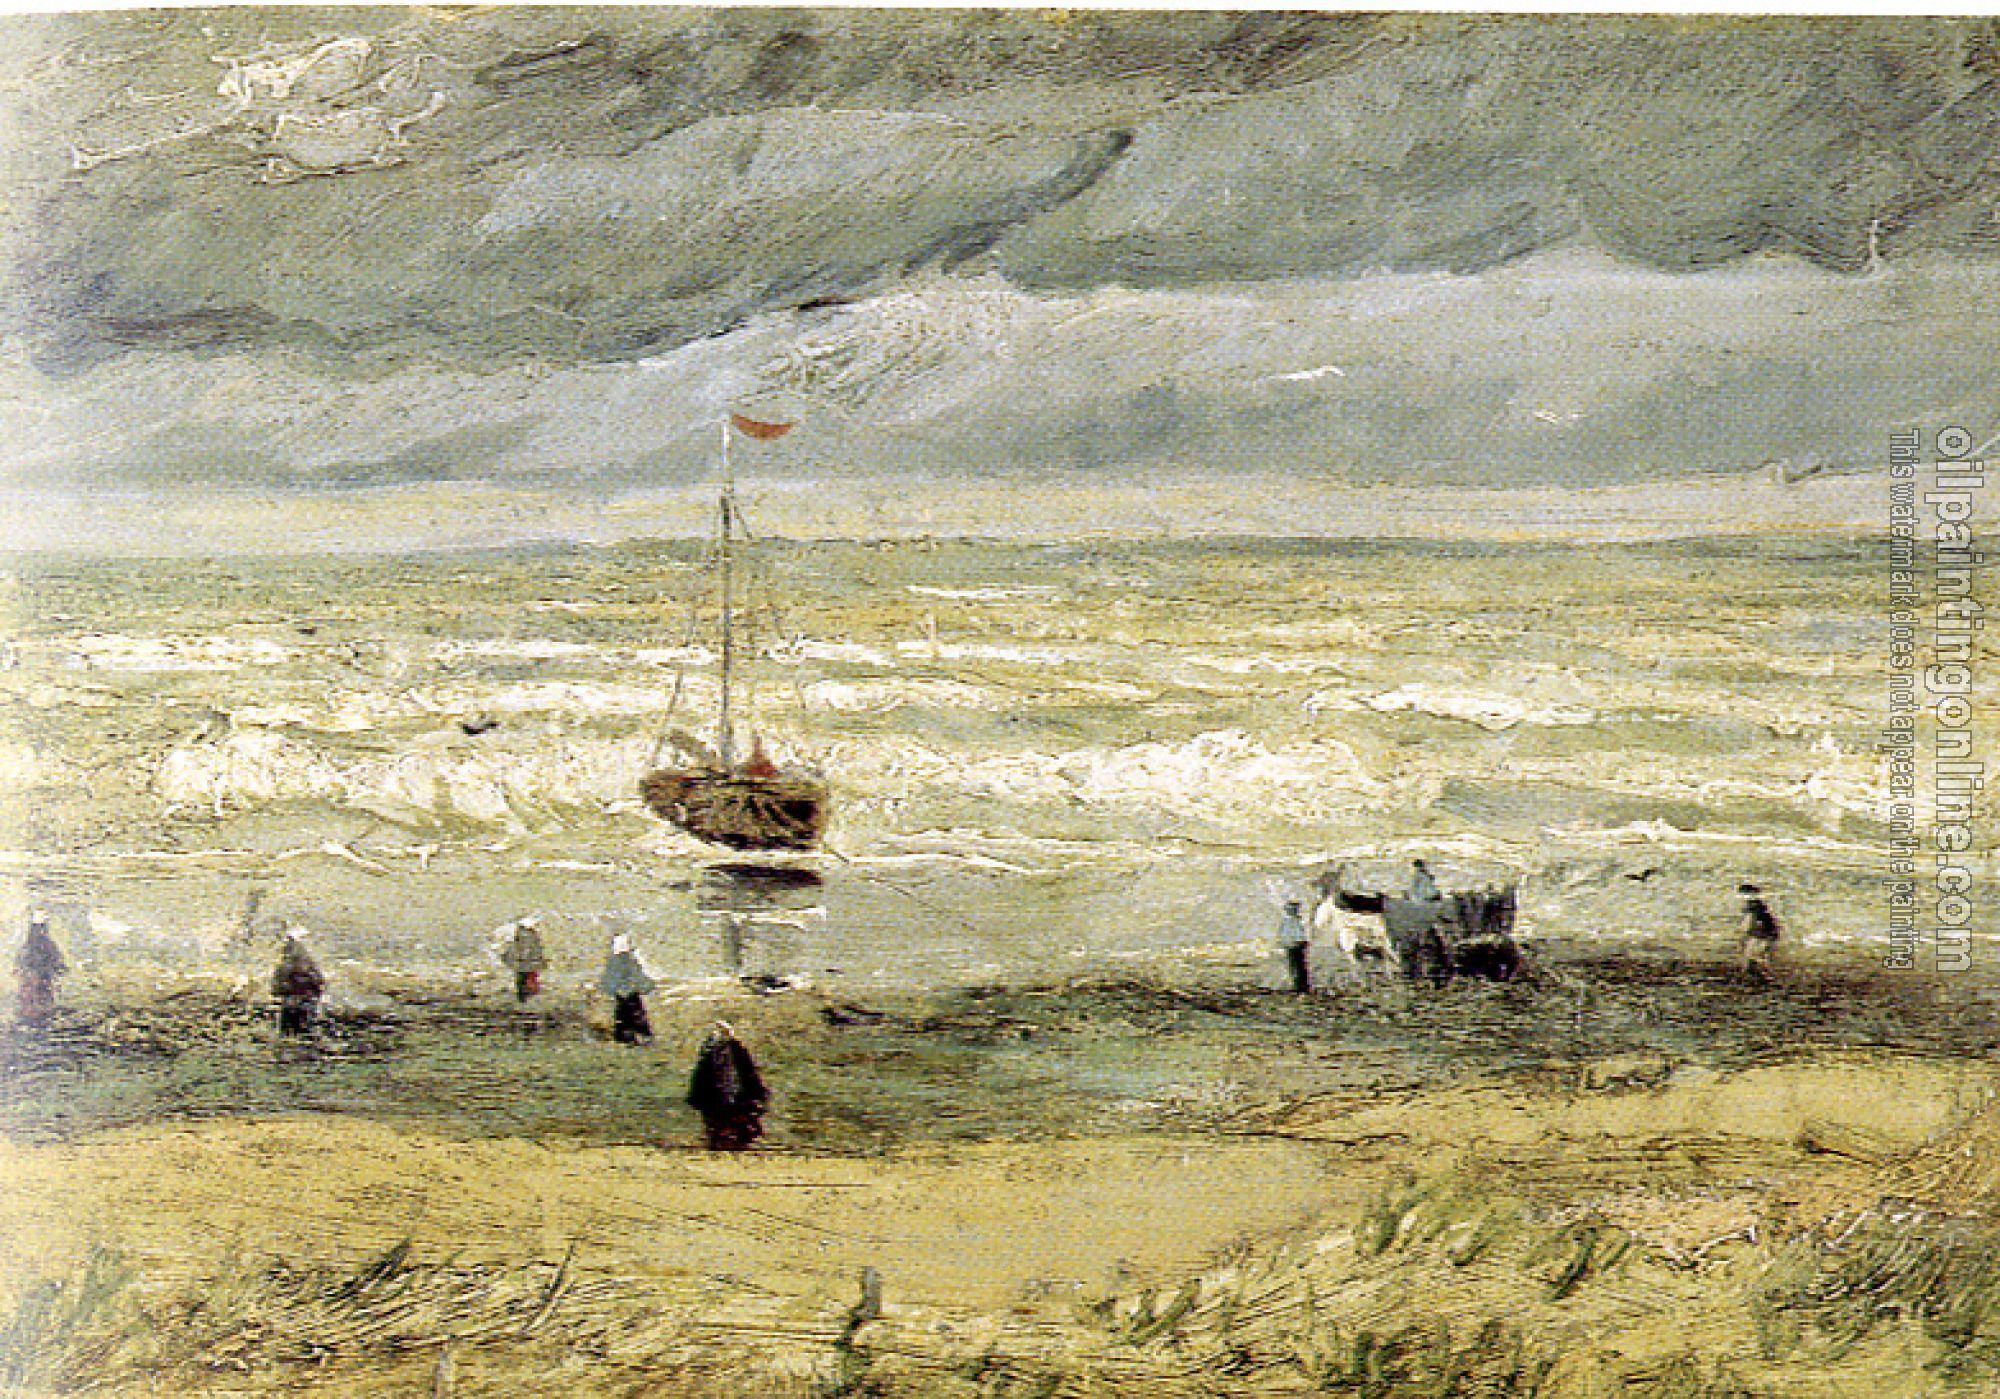 Gogh, Vincent van - Beach with Figures and sea with a ship